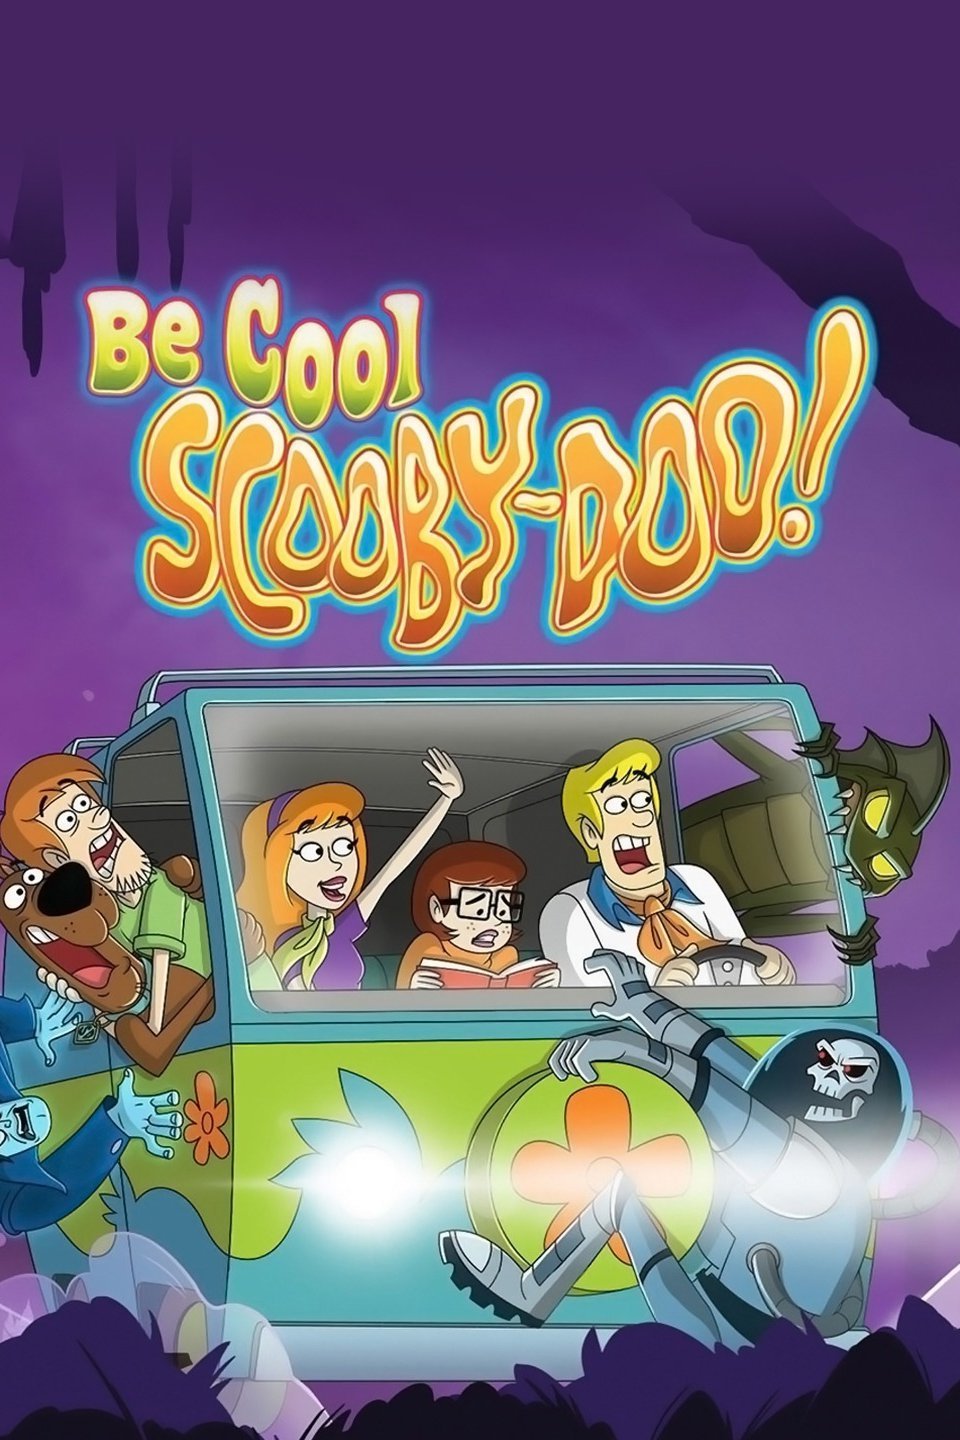 Be cool scooby doo reviews